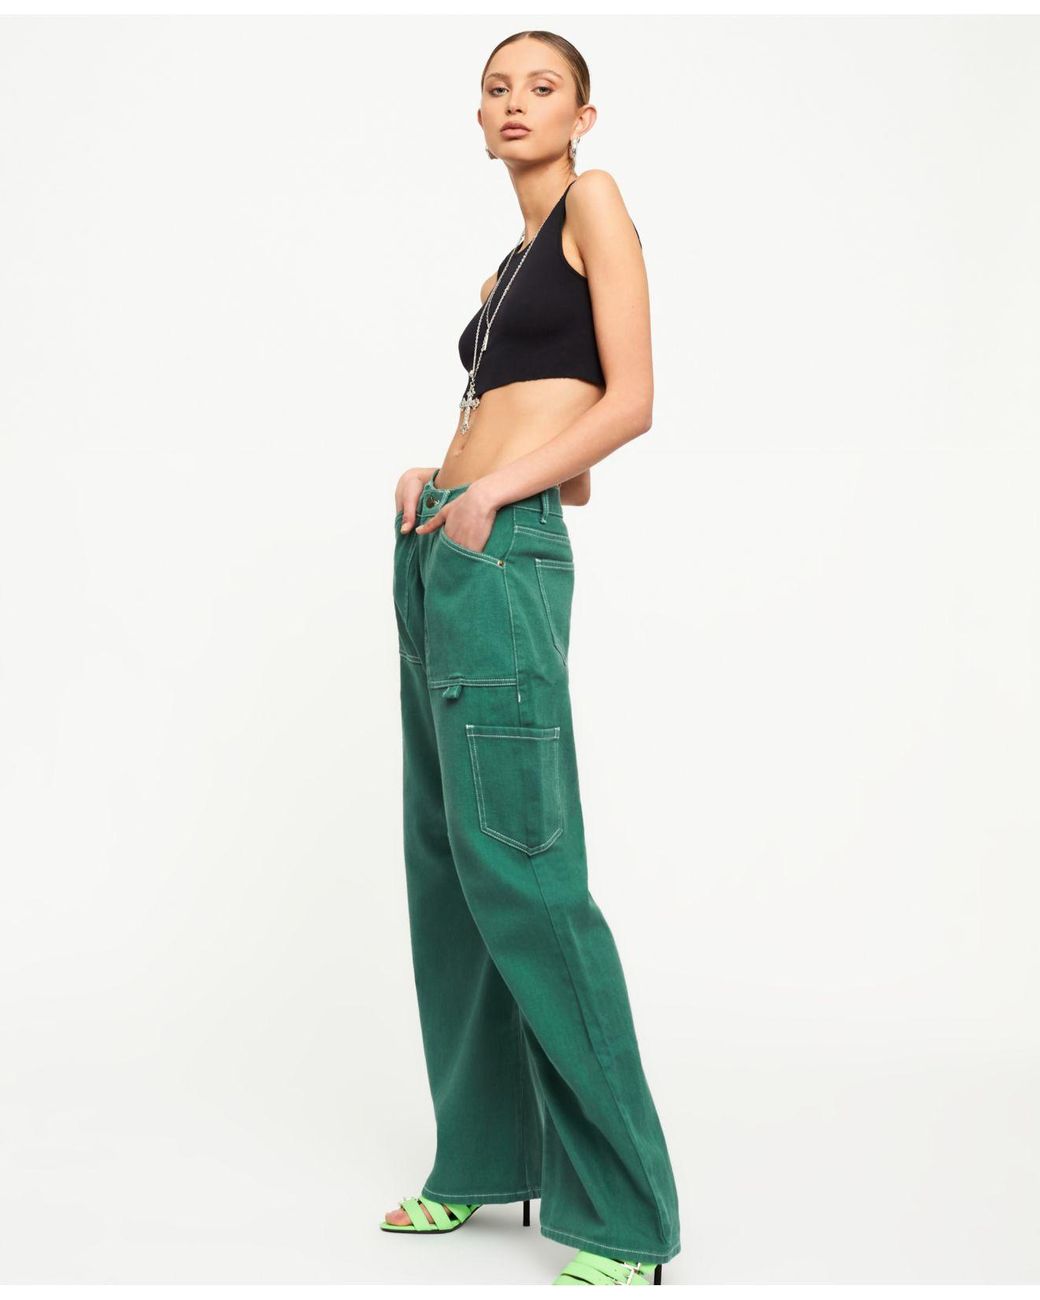 Lioness Miami Vice Cotton Carpenter Pants in Green | Lyst